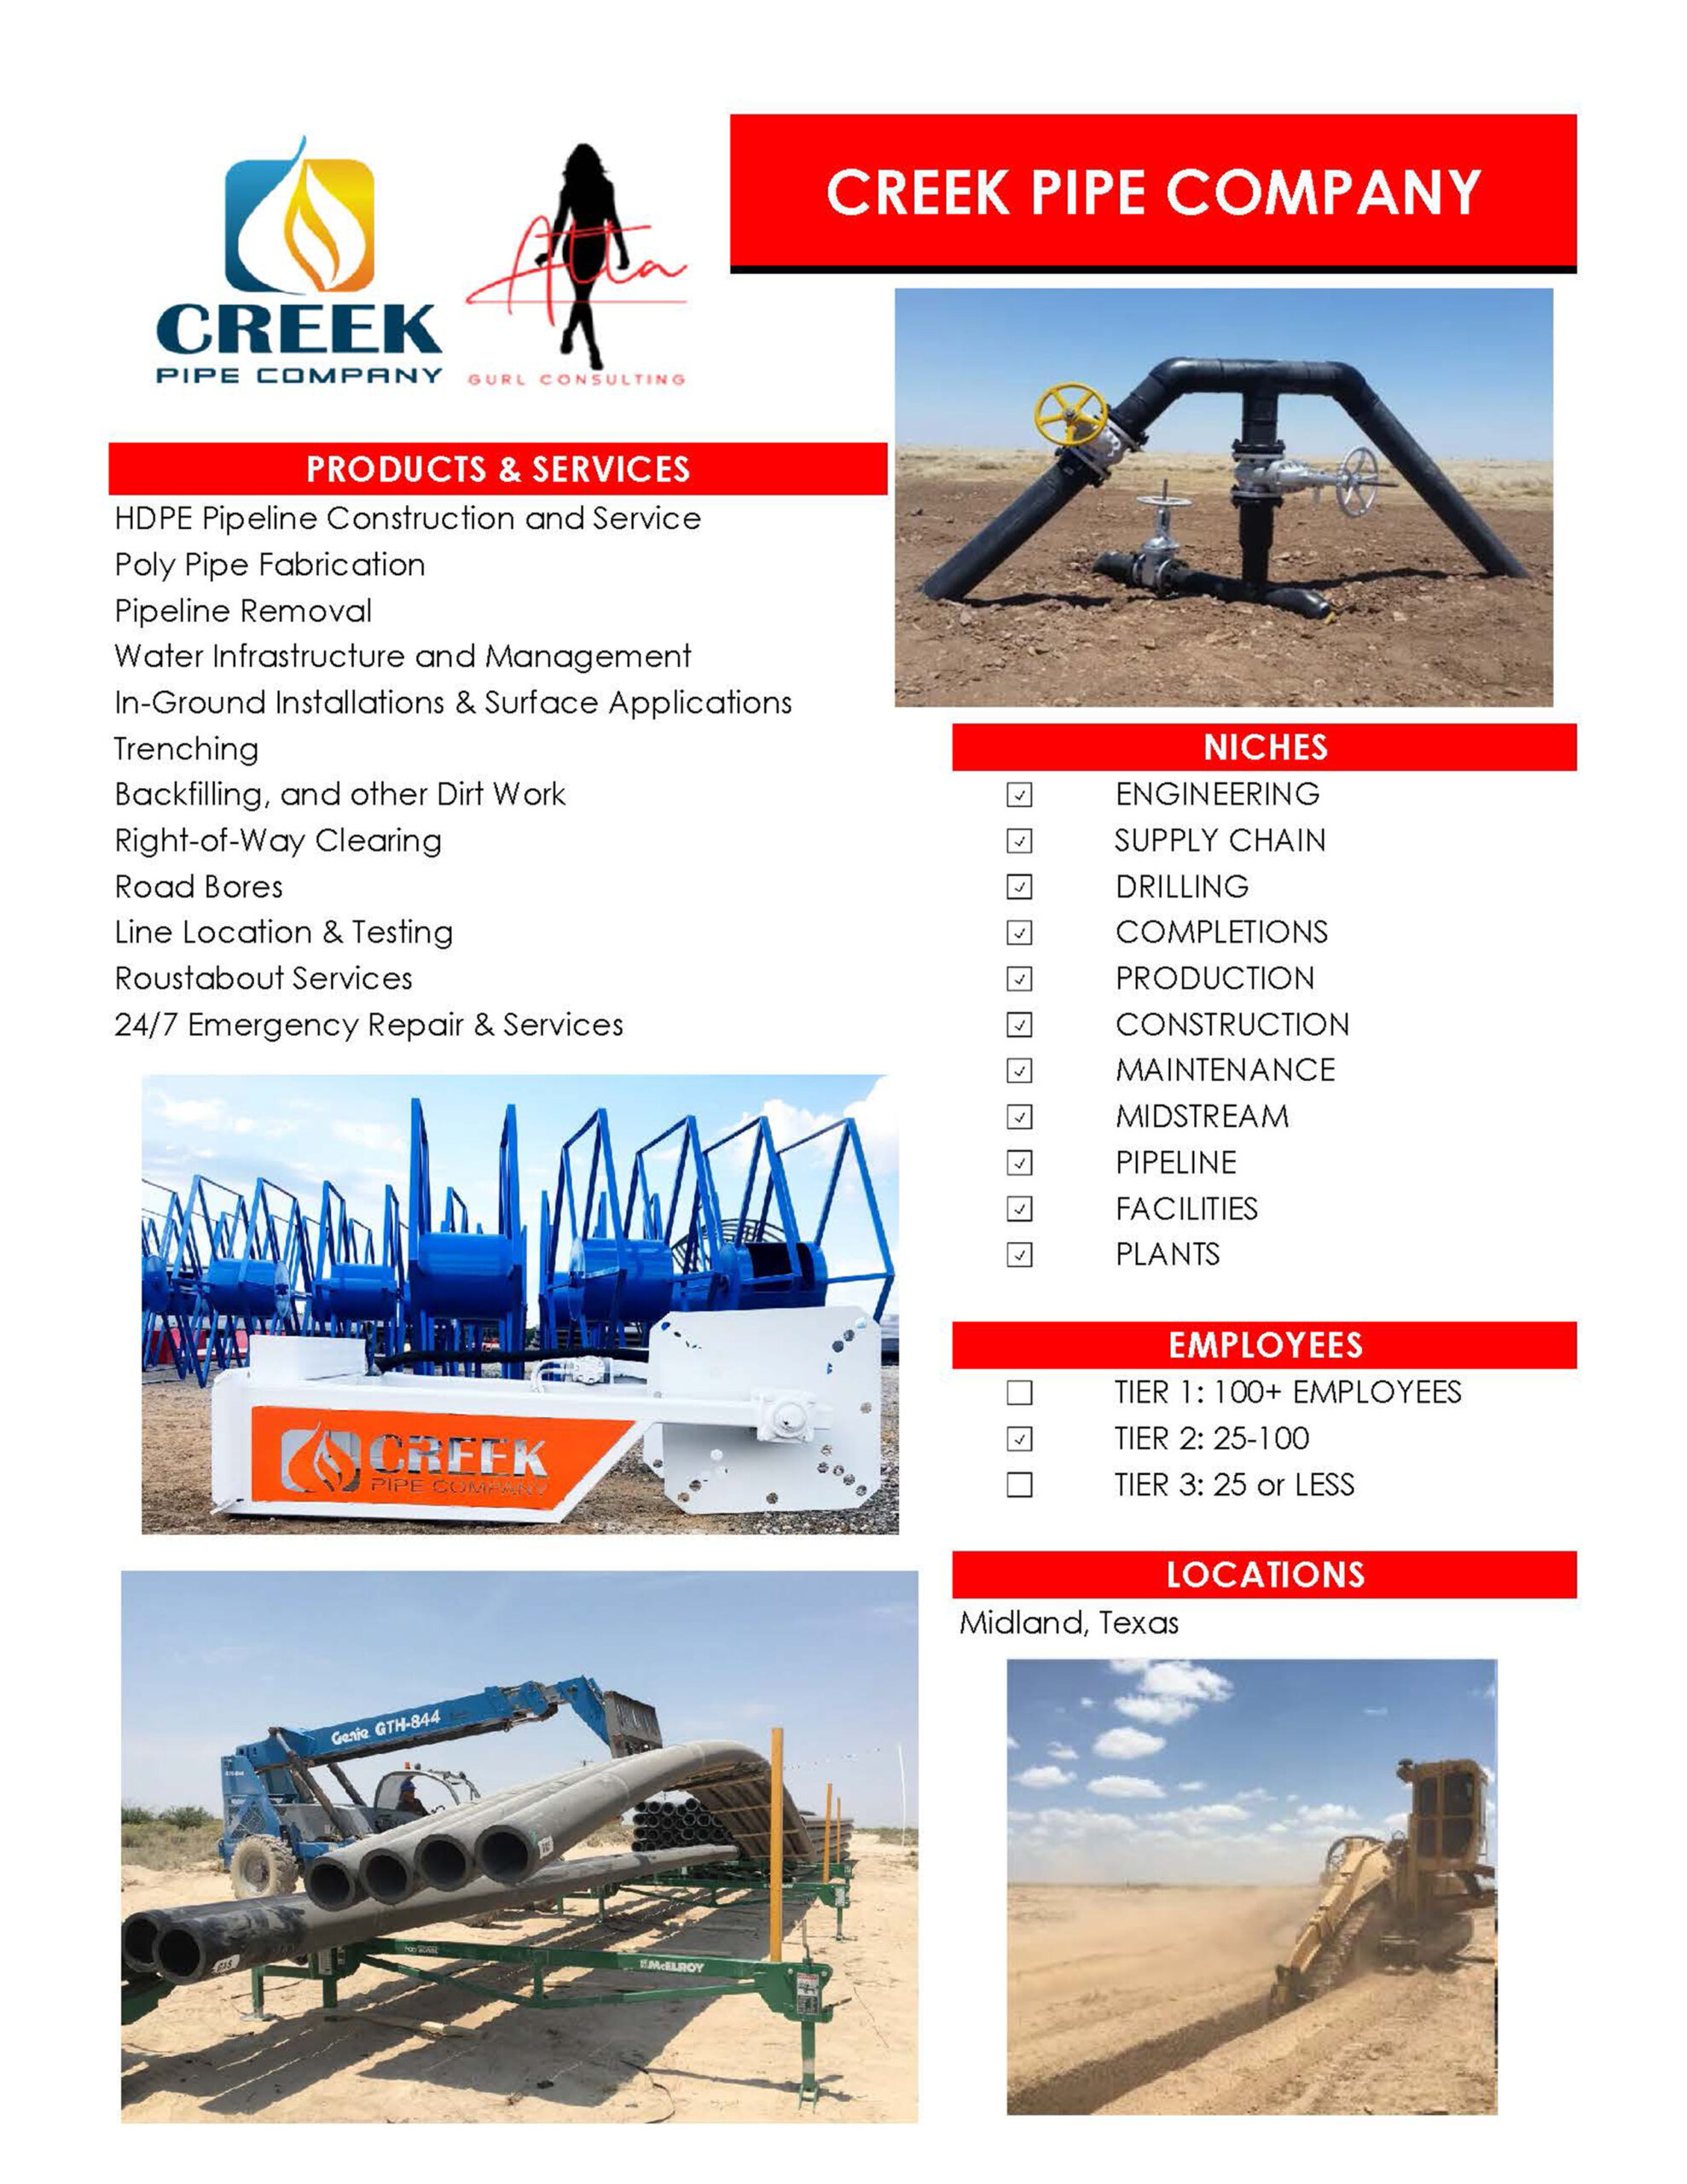 Creek Pipe Company - Vendor Client - PRODUCTS & SERVICES HDPE Pipeline Construction and Service Poly Pipe Fabrication Pipeline Removal Water Infrastructure and Management In-Ground Installations & Surface Applications Trenching Backfilling, and other Dirt Work Right-of-Way Clearing Road Bores Line Location & Testing Roustabout Services 24/7 Emergency Repair